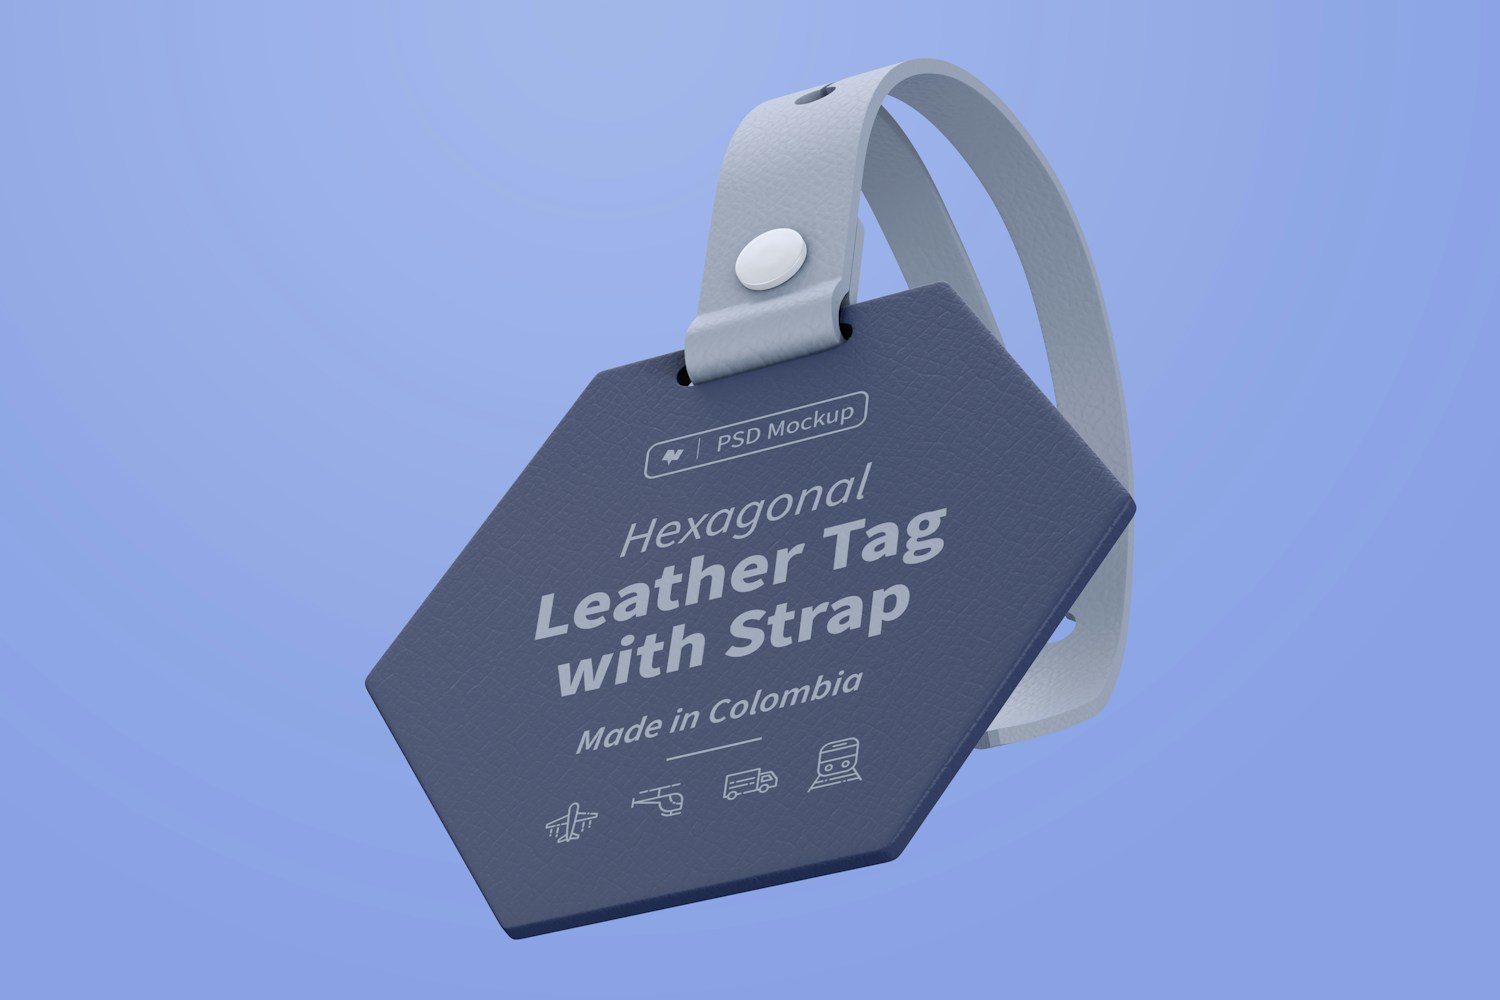 Hexagonal Leather Tag with Strap Mockup, Floating